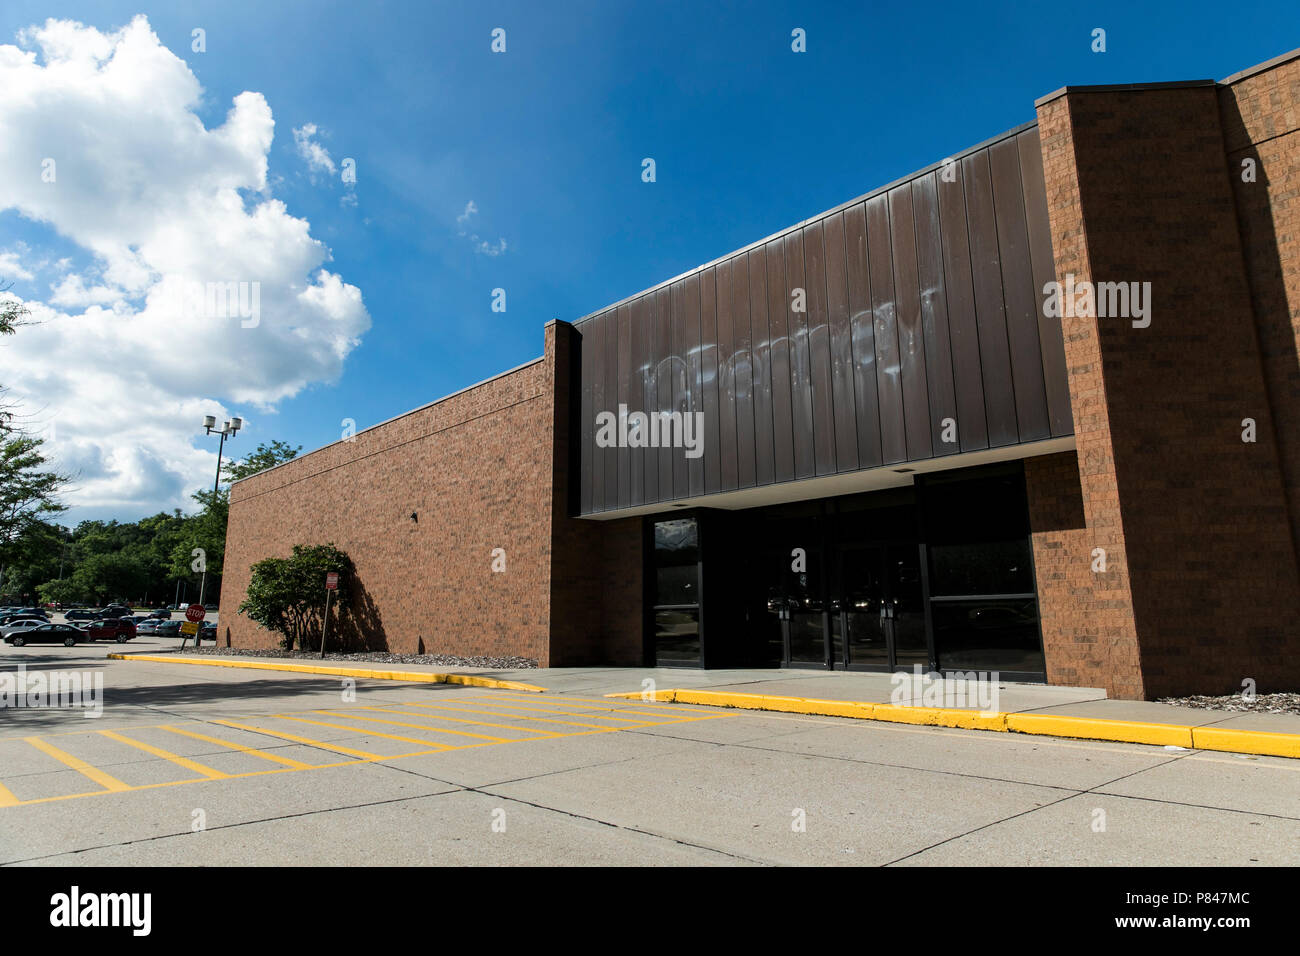 Jc penney hi-res stock photography and images - Alamy